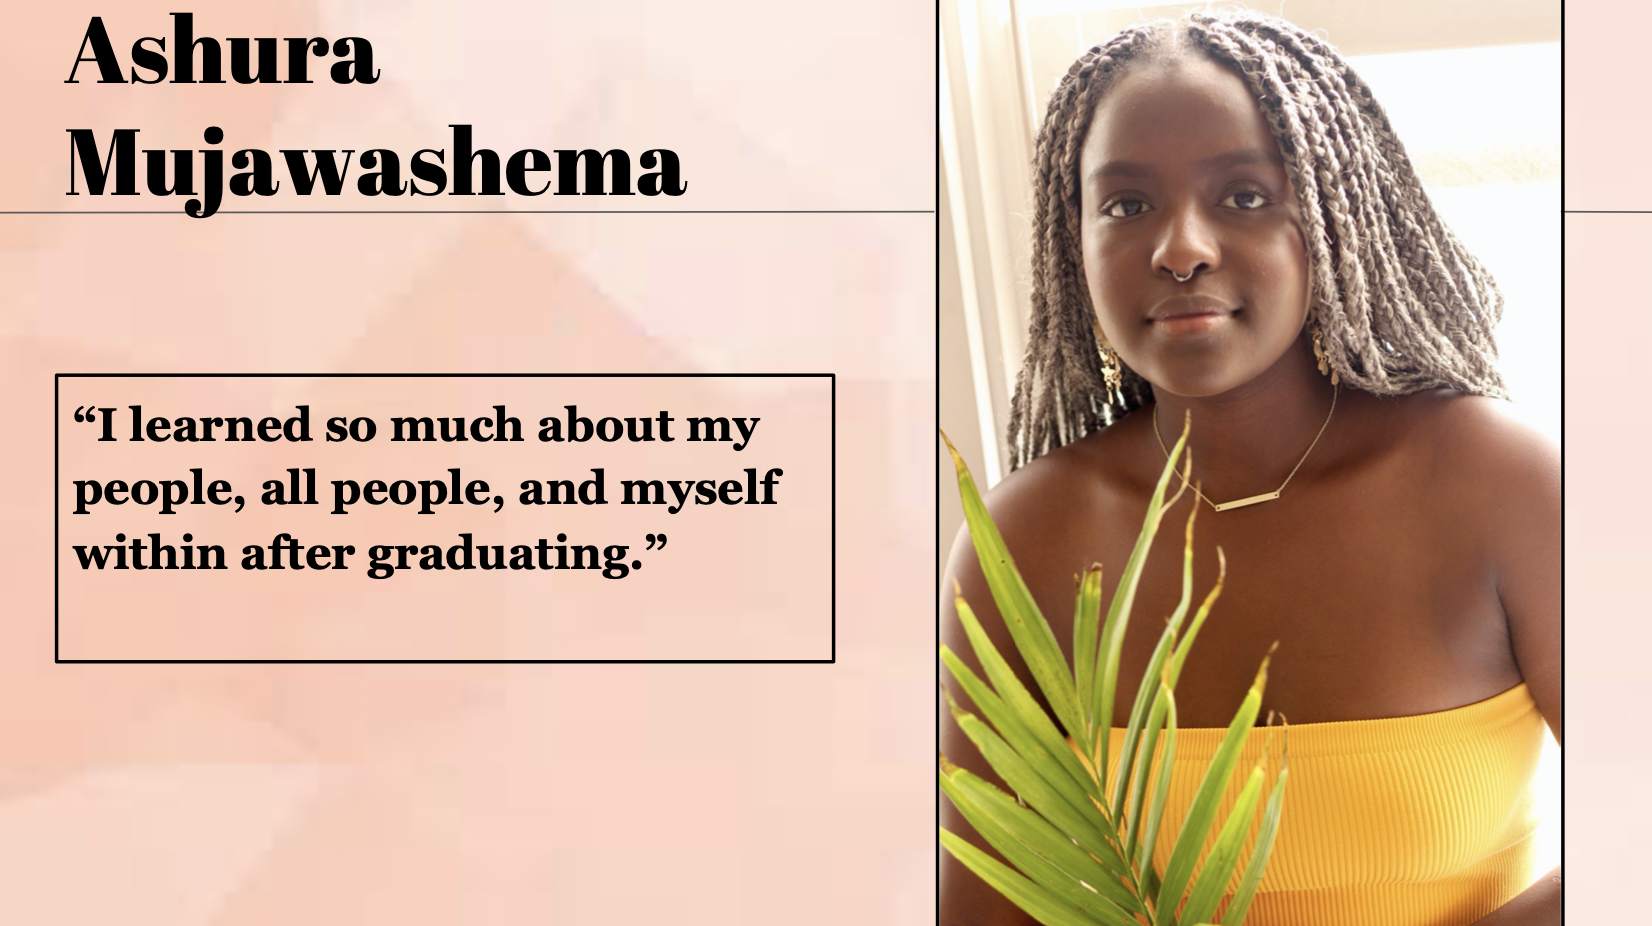 Ashura Mujawashema learned so much about her people, all people, and herself within after graduating.